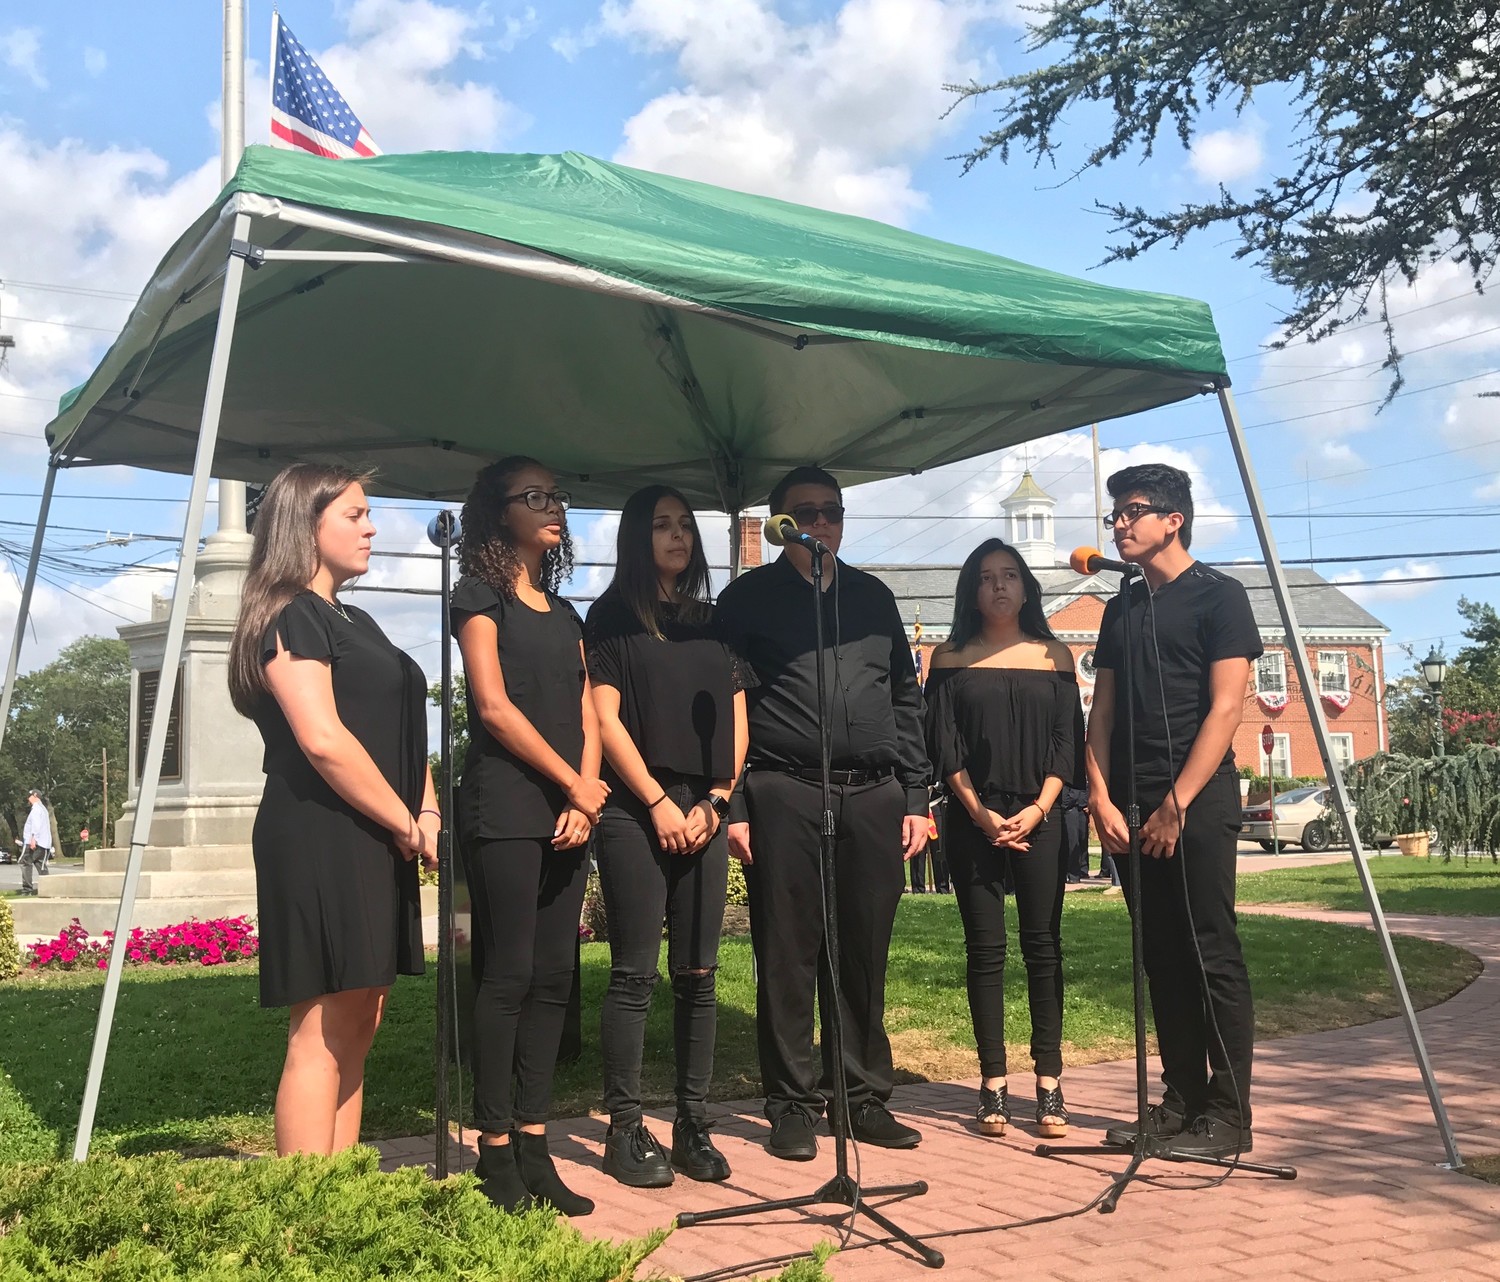 Lawrence High School’s acapella ensemble closed the ceremony with a rendition of  “God Bless America.”